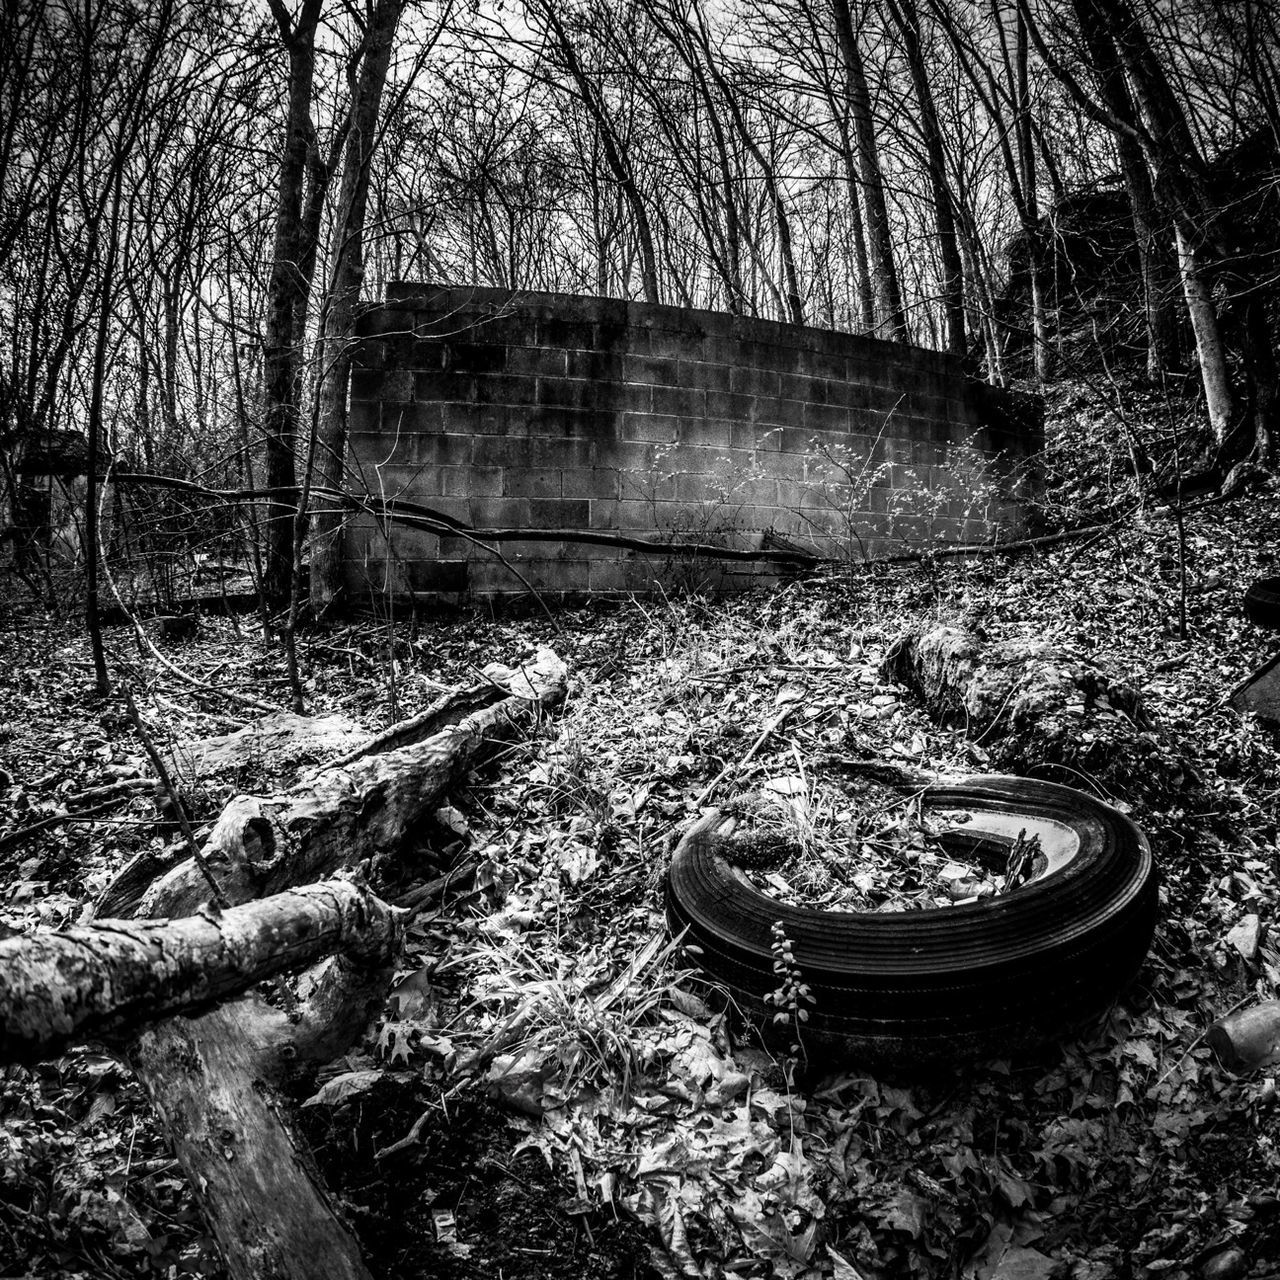 tree, abandoned, forest, obsolete, bare tree, damaged, transportation, old, field, tranquility, run-down, nature, deterioration, mode of transport, no people, day, outdoors, broken, wood - material, destruction